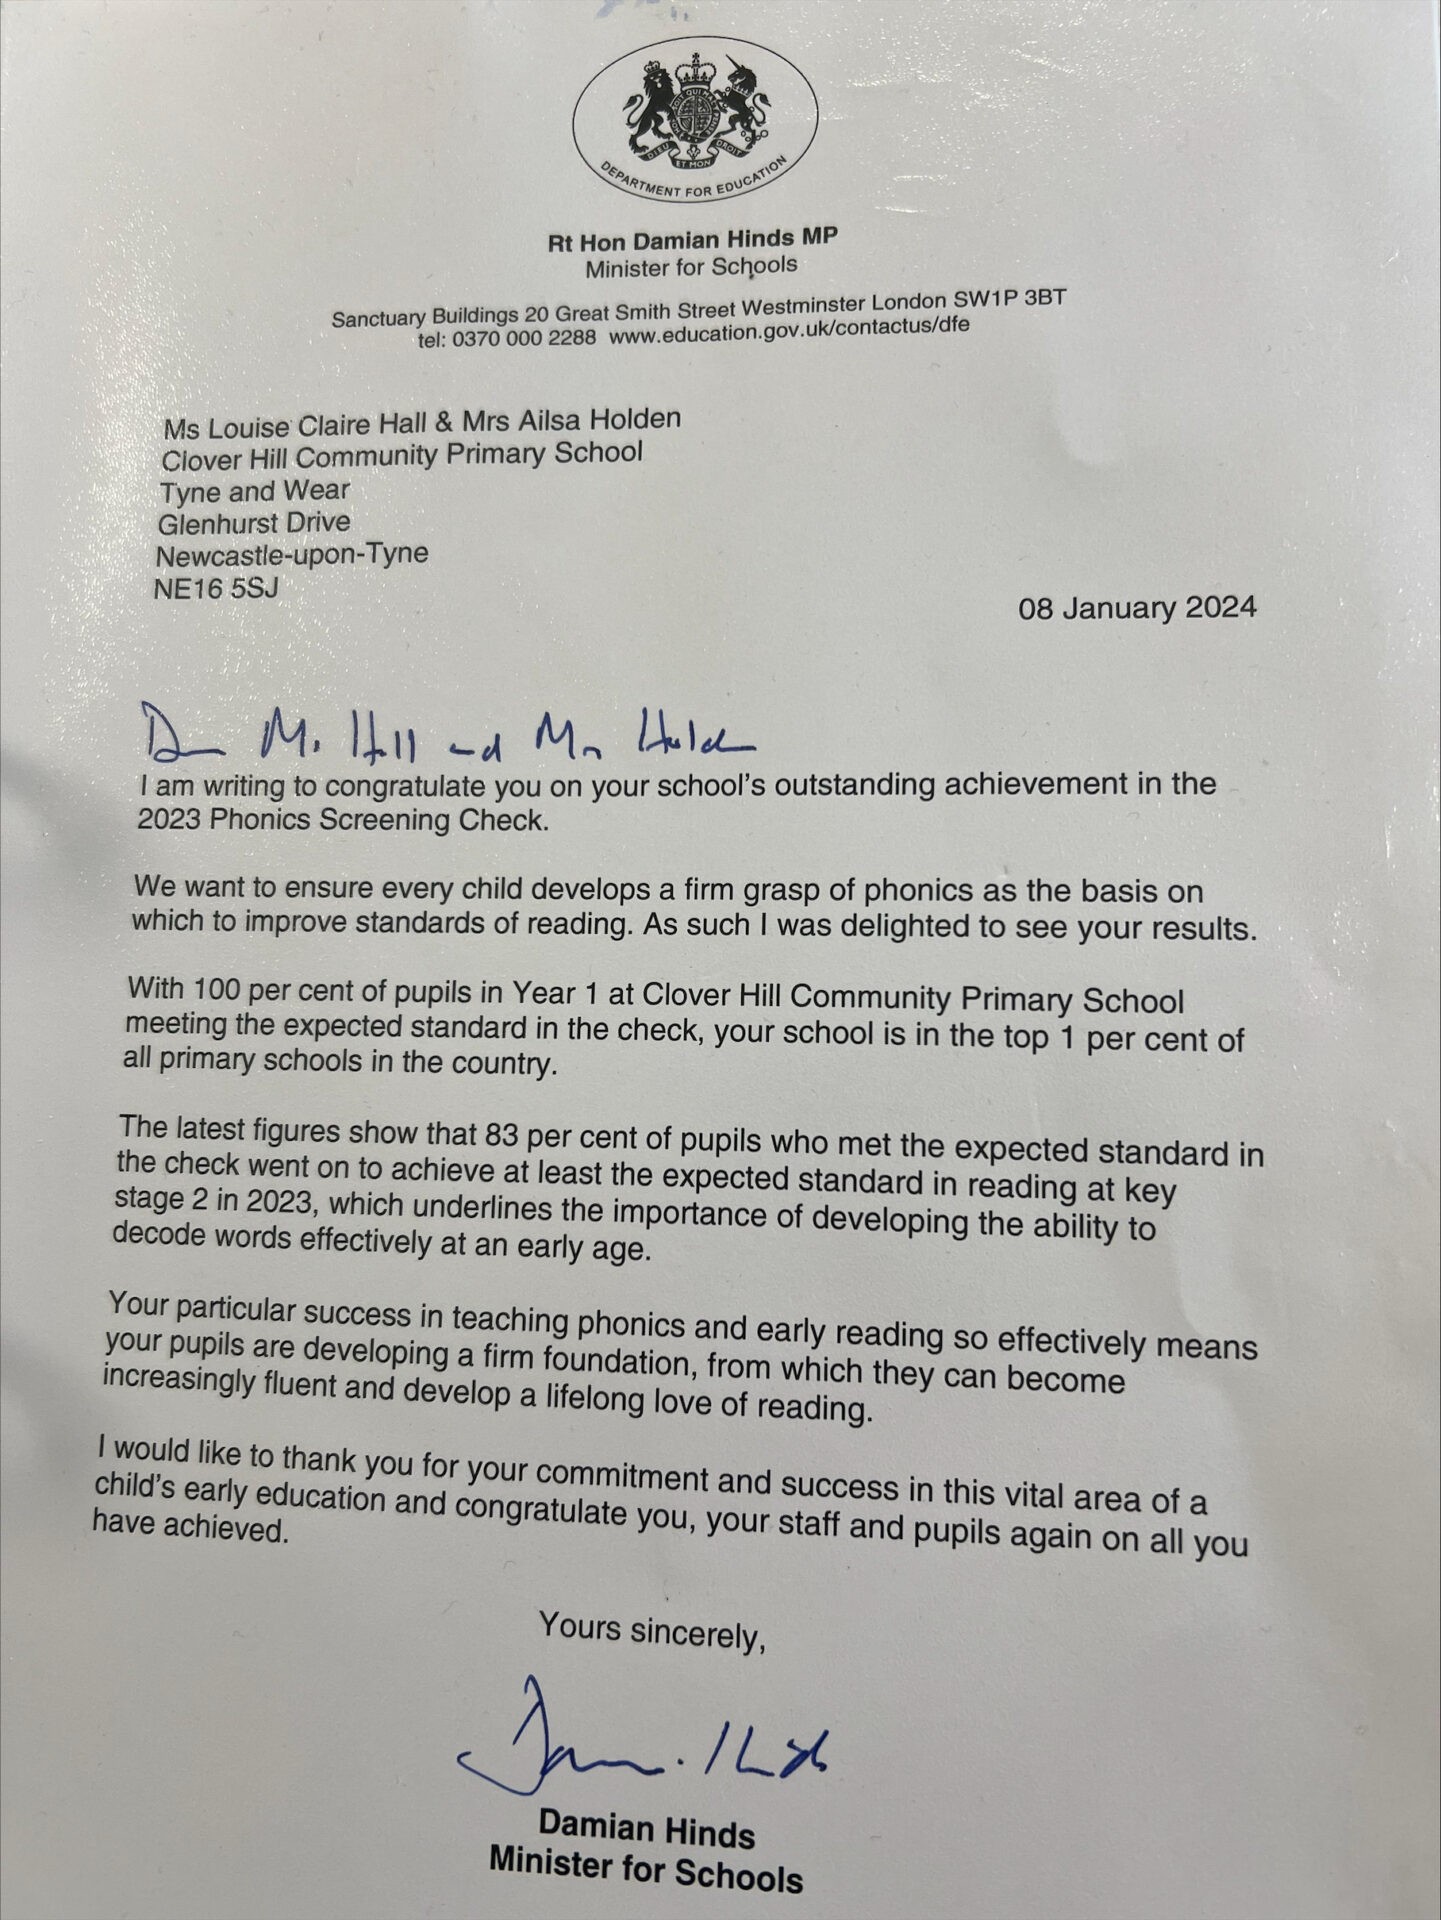 Damian Hinds (the Minister for Schools) Letter